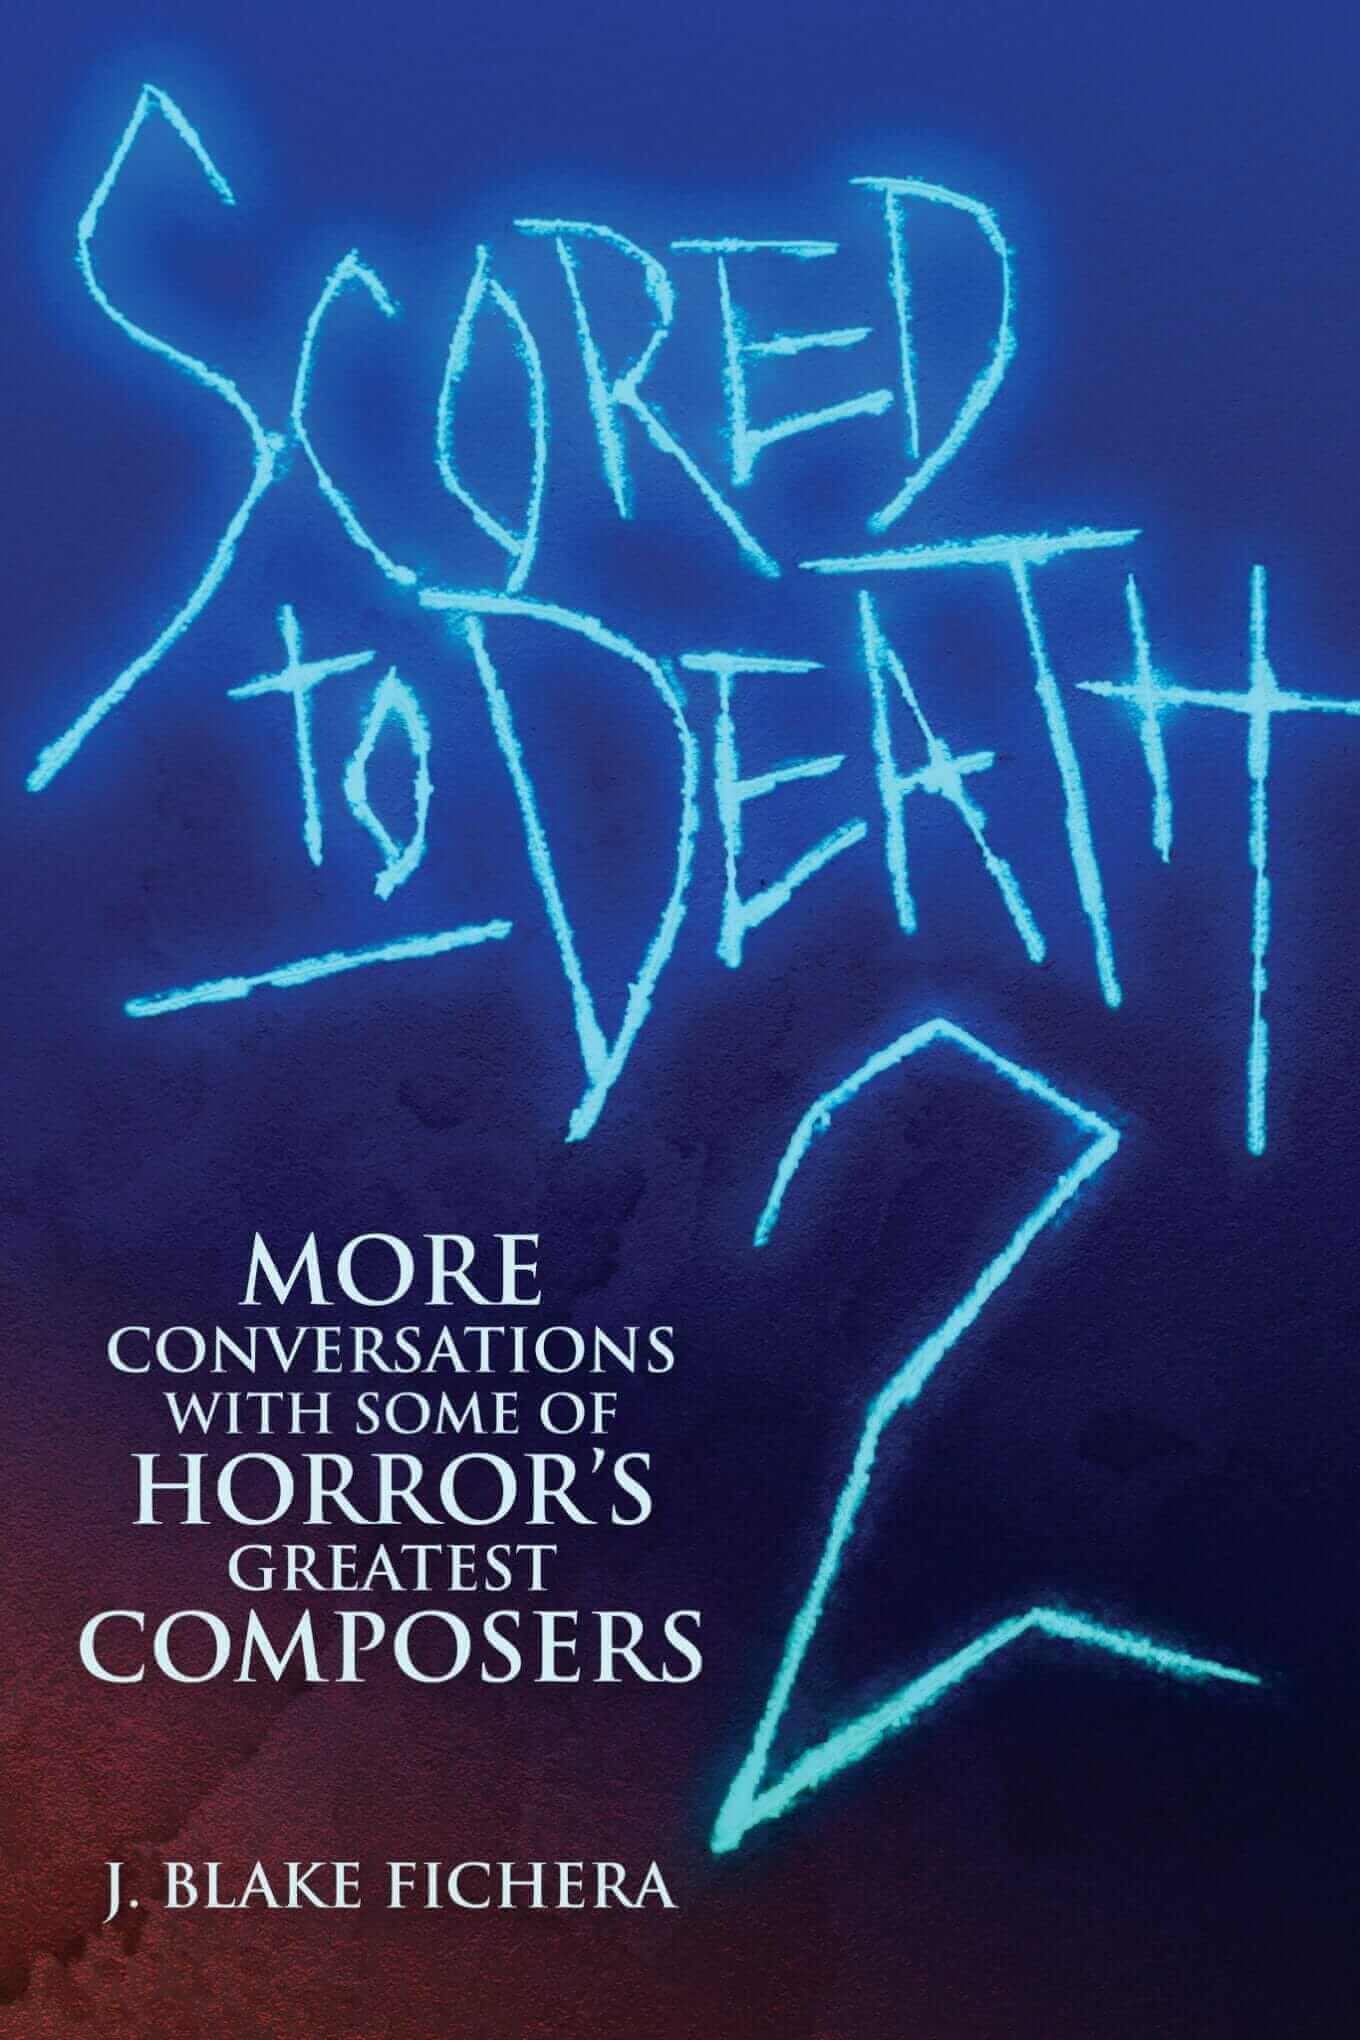 Scored To Death 2 Final Cover Scaled